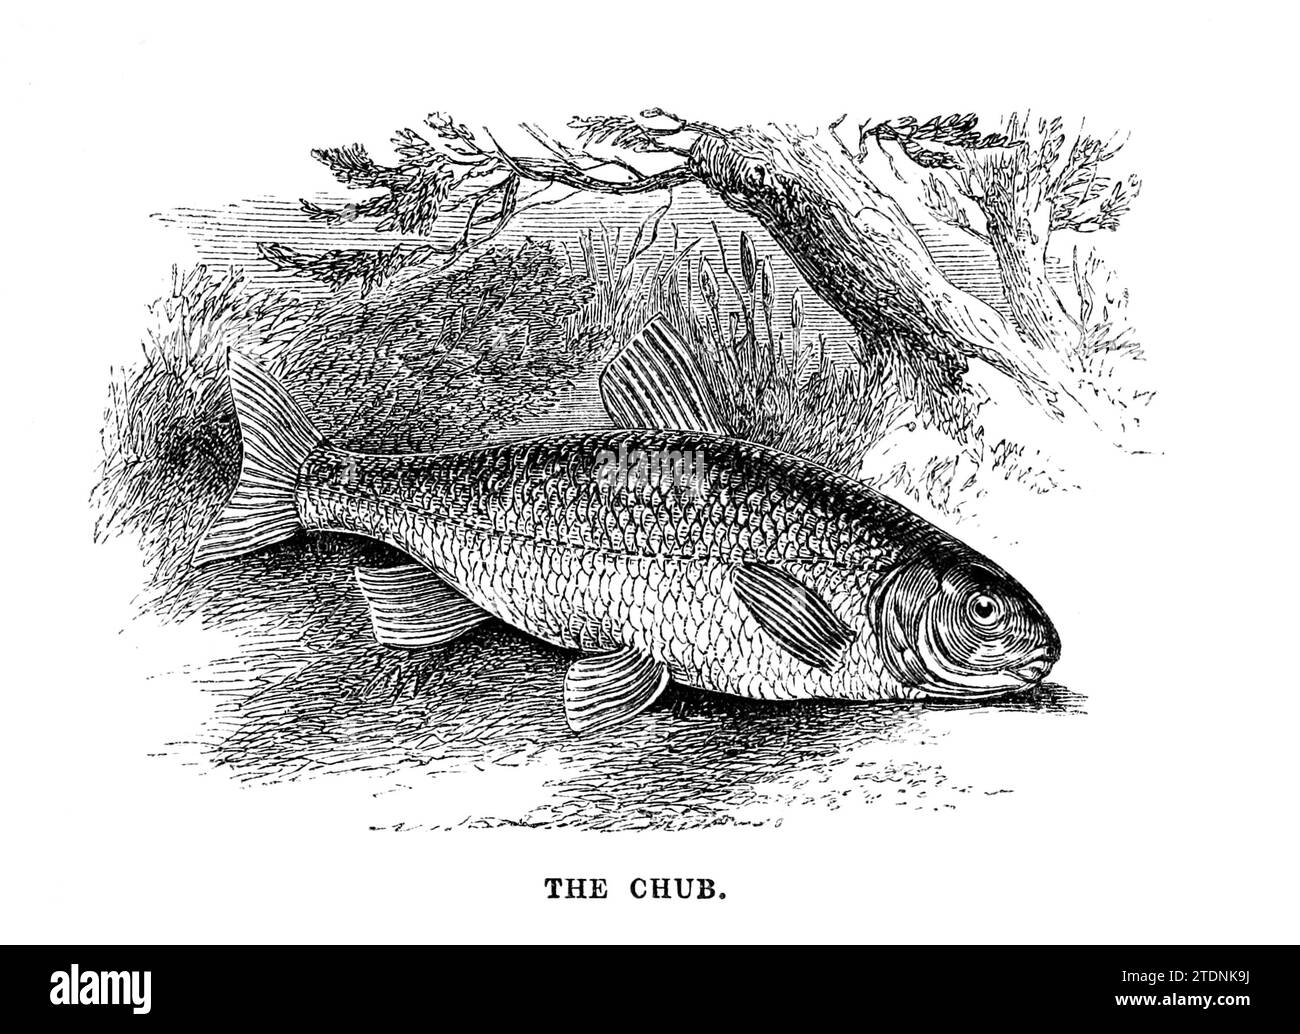 The Chub (Leuciscus cephalus) from the book The Severn valley: a series of sketches, descriptive and pictorial, of the course of the Severn: containing notices of its topographical, industrial, and geological features; with glances at its historical and legendary associations by Randall, John, 1810-1910 Publication date 1862 Publisher J. S. Virtue Stock Photo